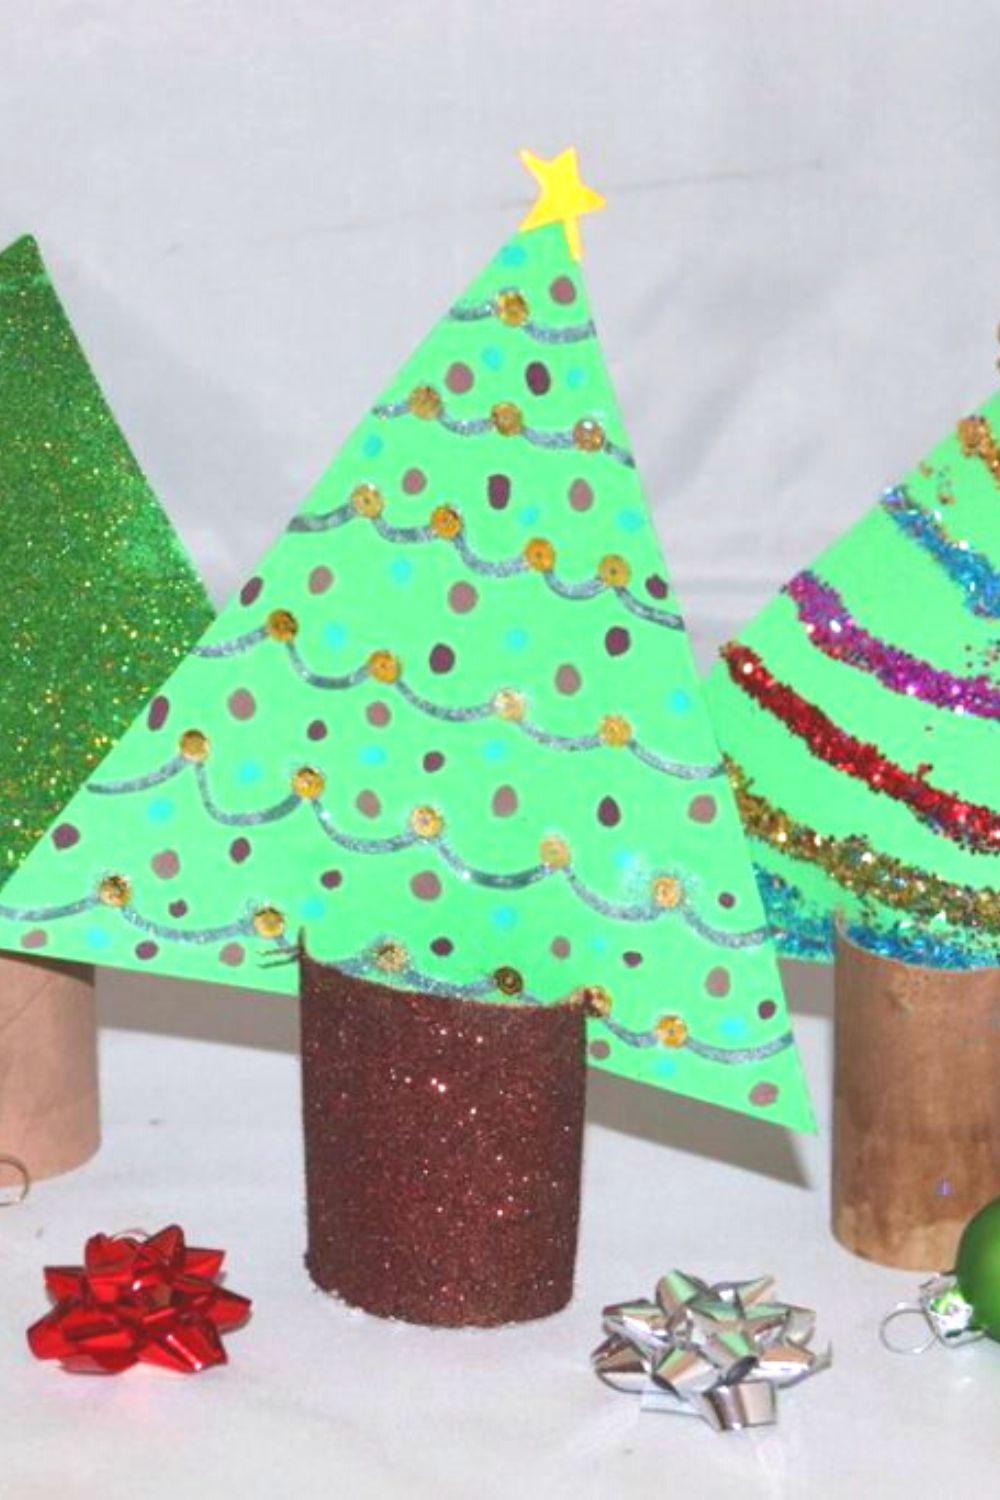 Easy Christmas Tree Craft with Construction Paper - Our WabiSabi Life